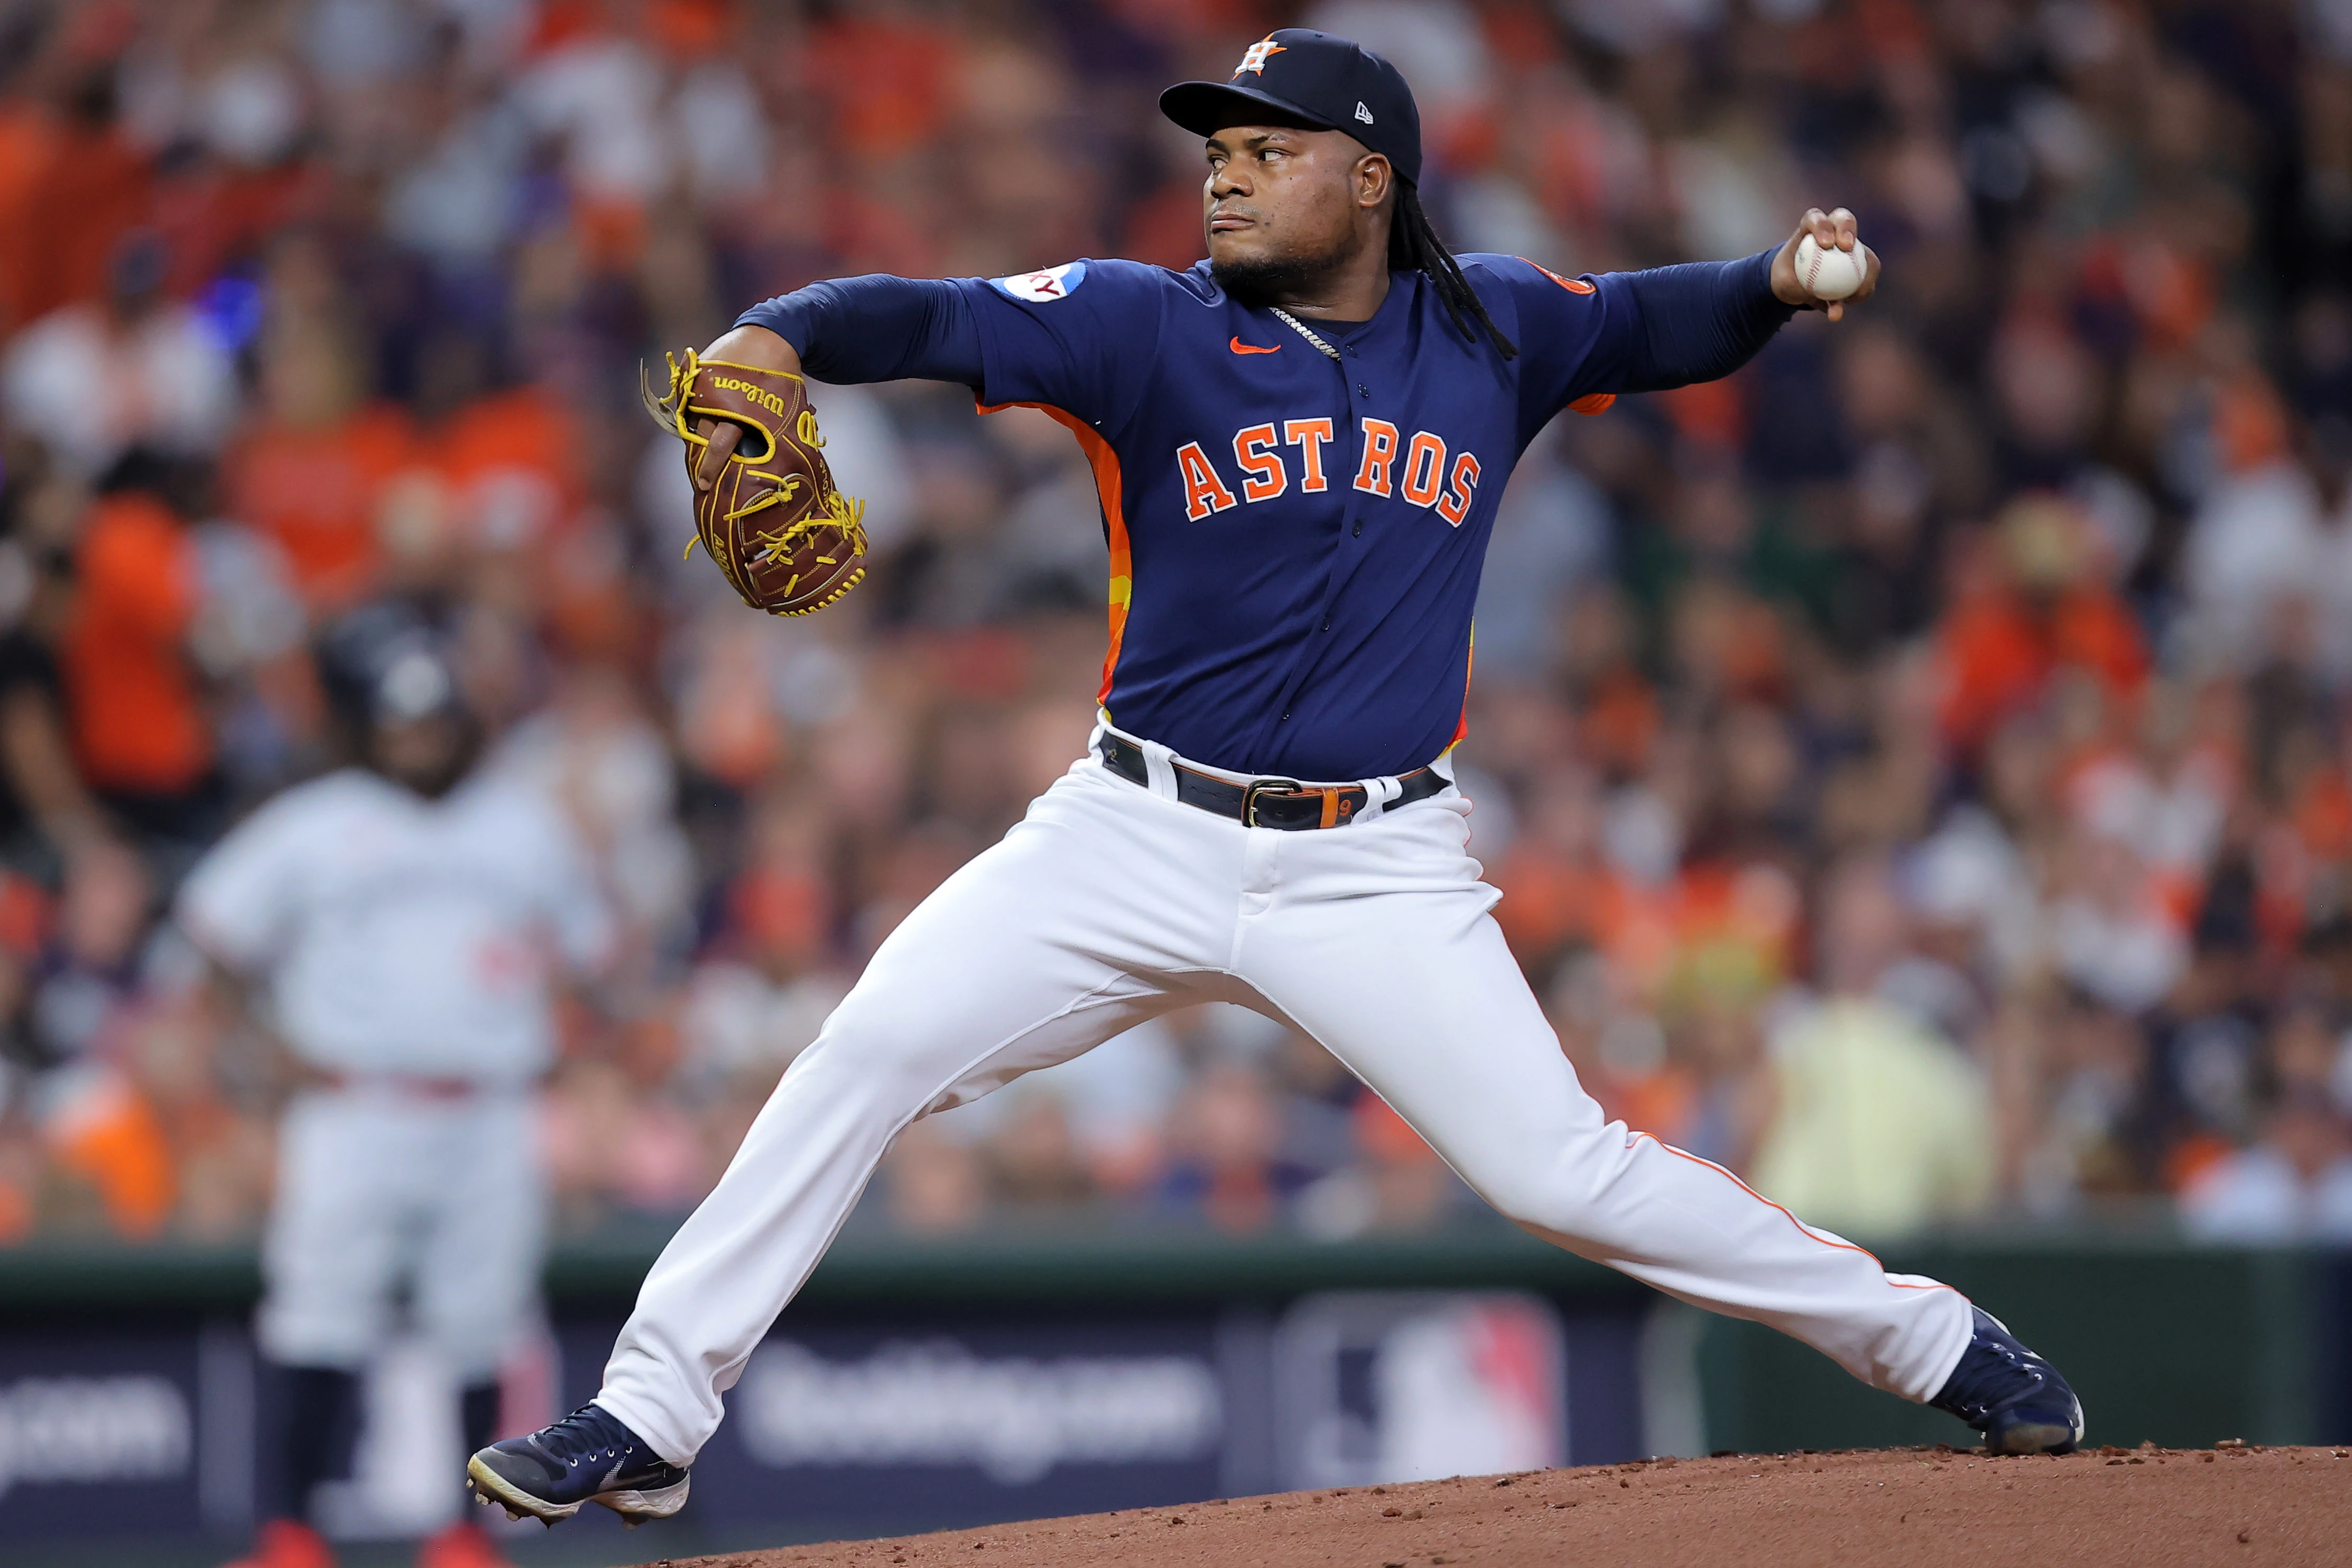 Astros vs. Rangers ALCS Game 1: Betting Trends, Records ATS, Home